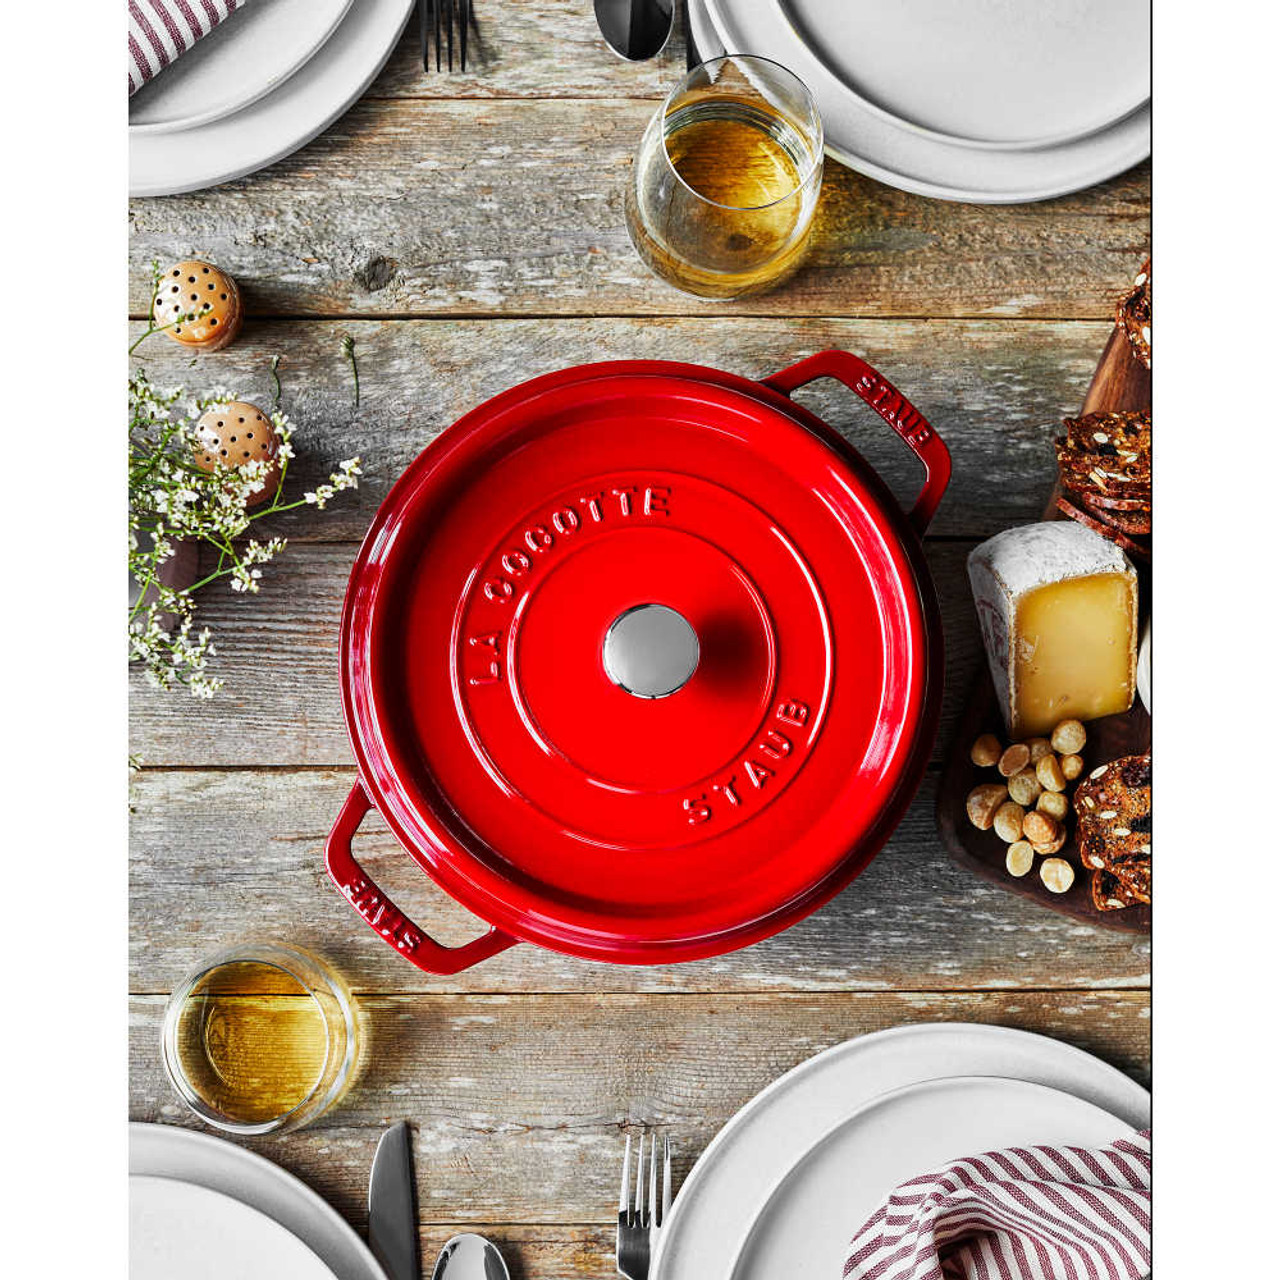 https://cdn11.bigcommerce.com/s-hccytny0od/images/stencil/1280x1280/products/5817/26568/Staub_Cast_Iron_Round_Cocotte_in_Cherry__61601.1702420123.jpg?c=2?imbypass=on